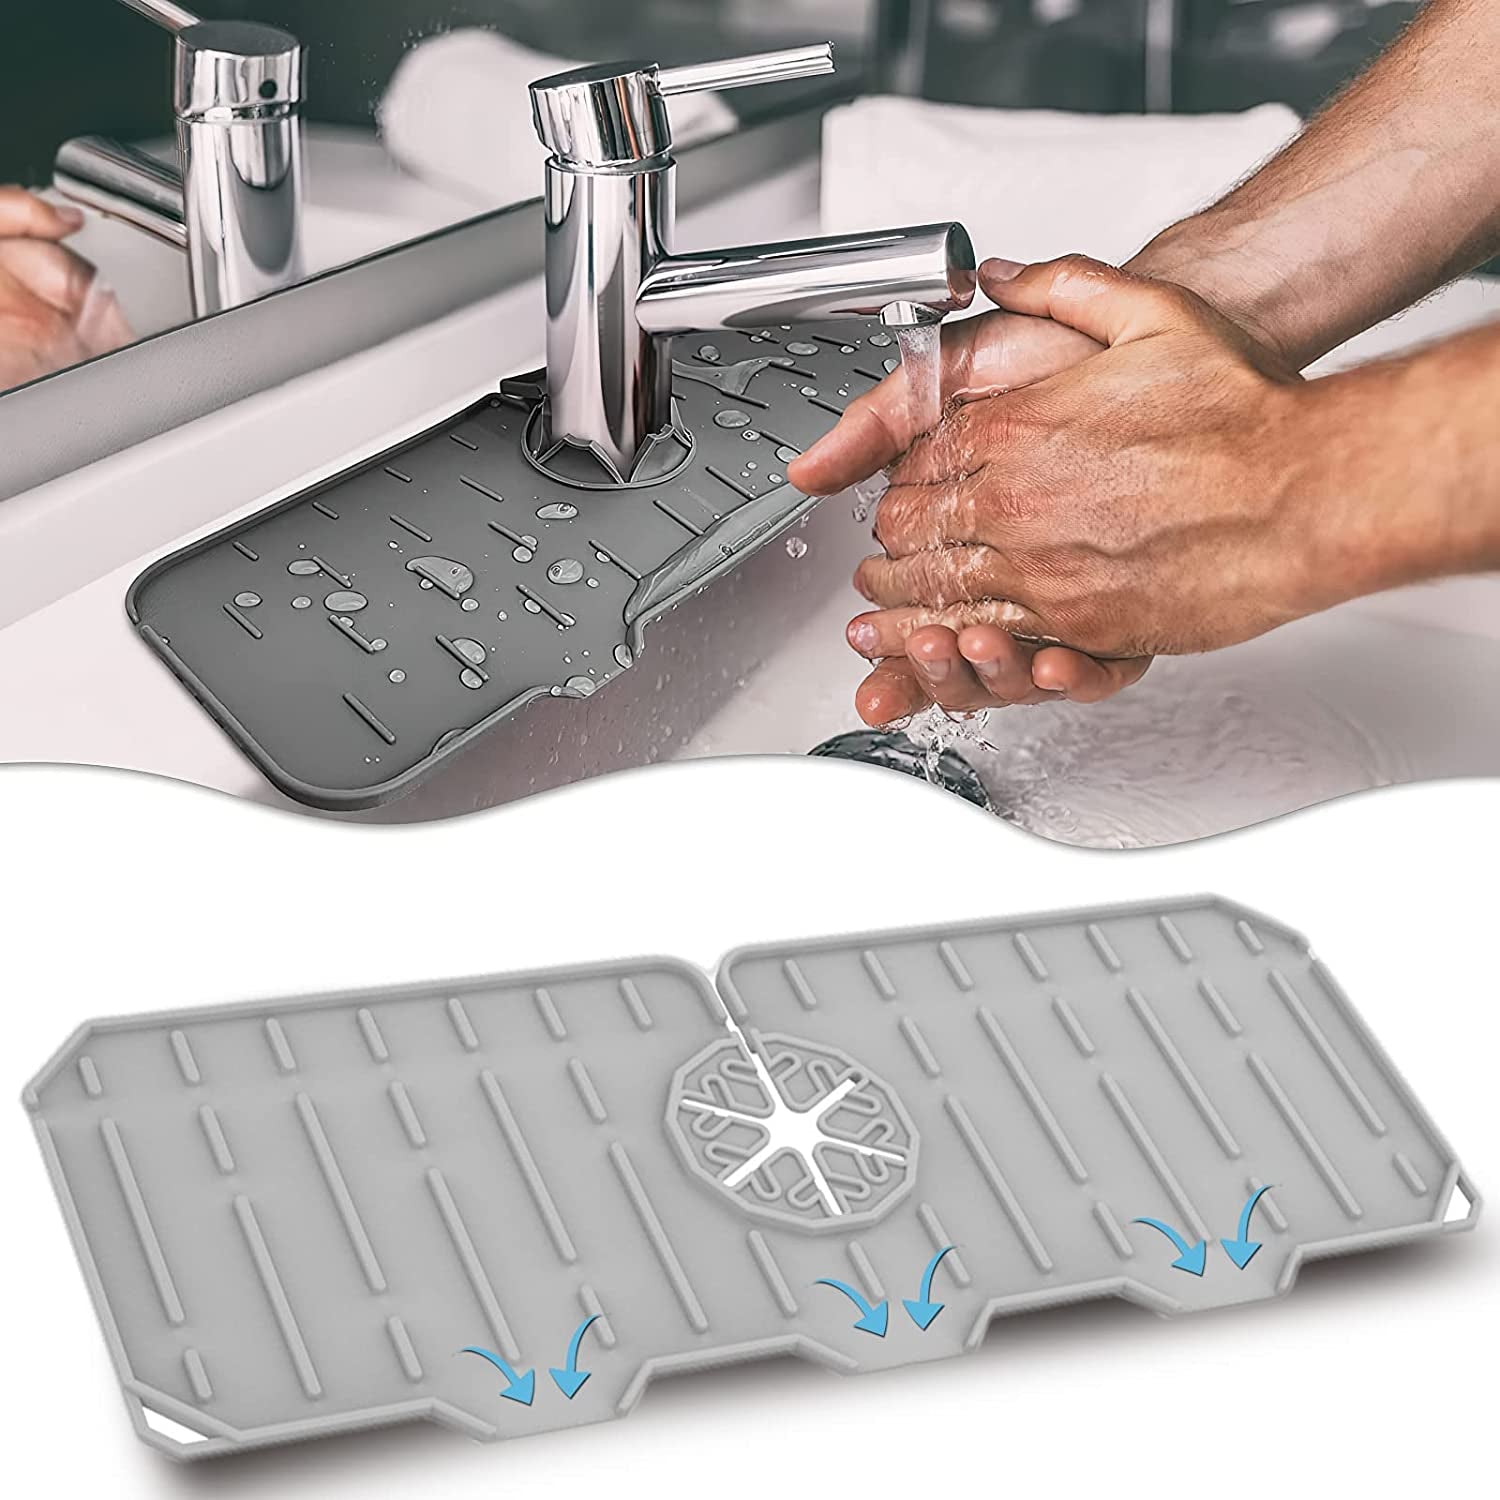 KGYMJR, Faucet Sink Splash Guard, Silicone Kitchen Sink Faucet Splash Catcher Mat, Kitchen Guard Faucet Drip Catcher Tray, Faucet Water Catcher Mat for Kitchen Bathroom Bar and RV (Grey)